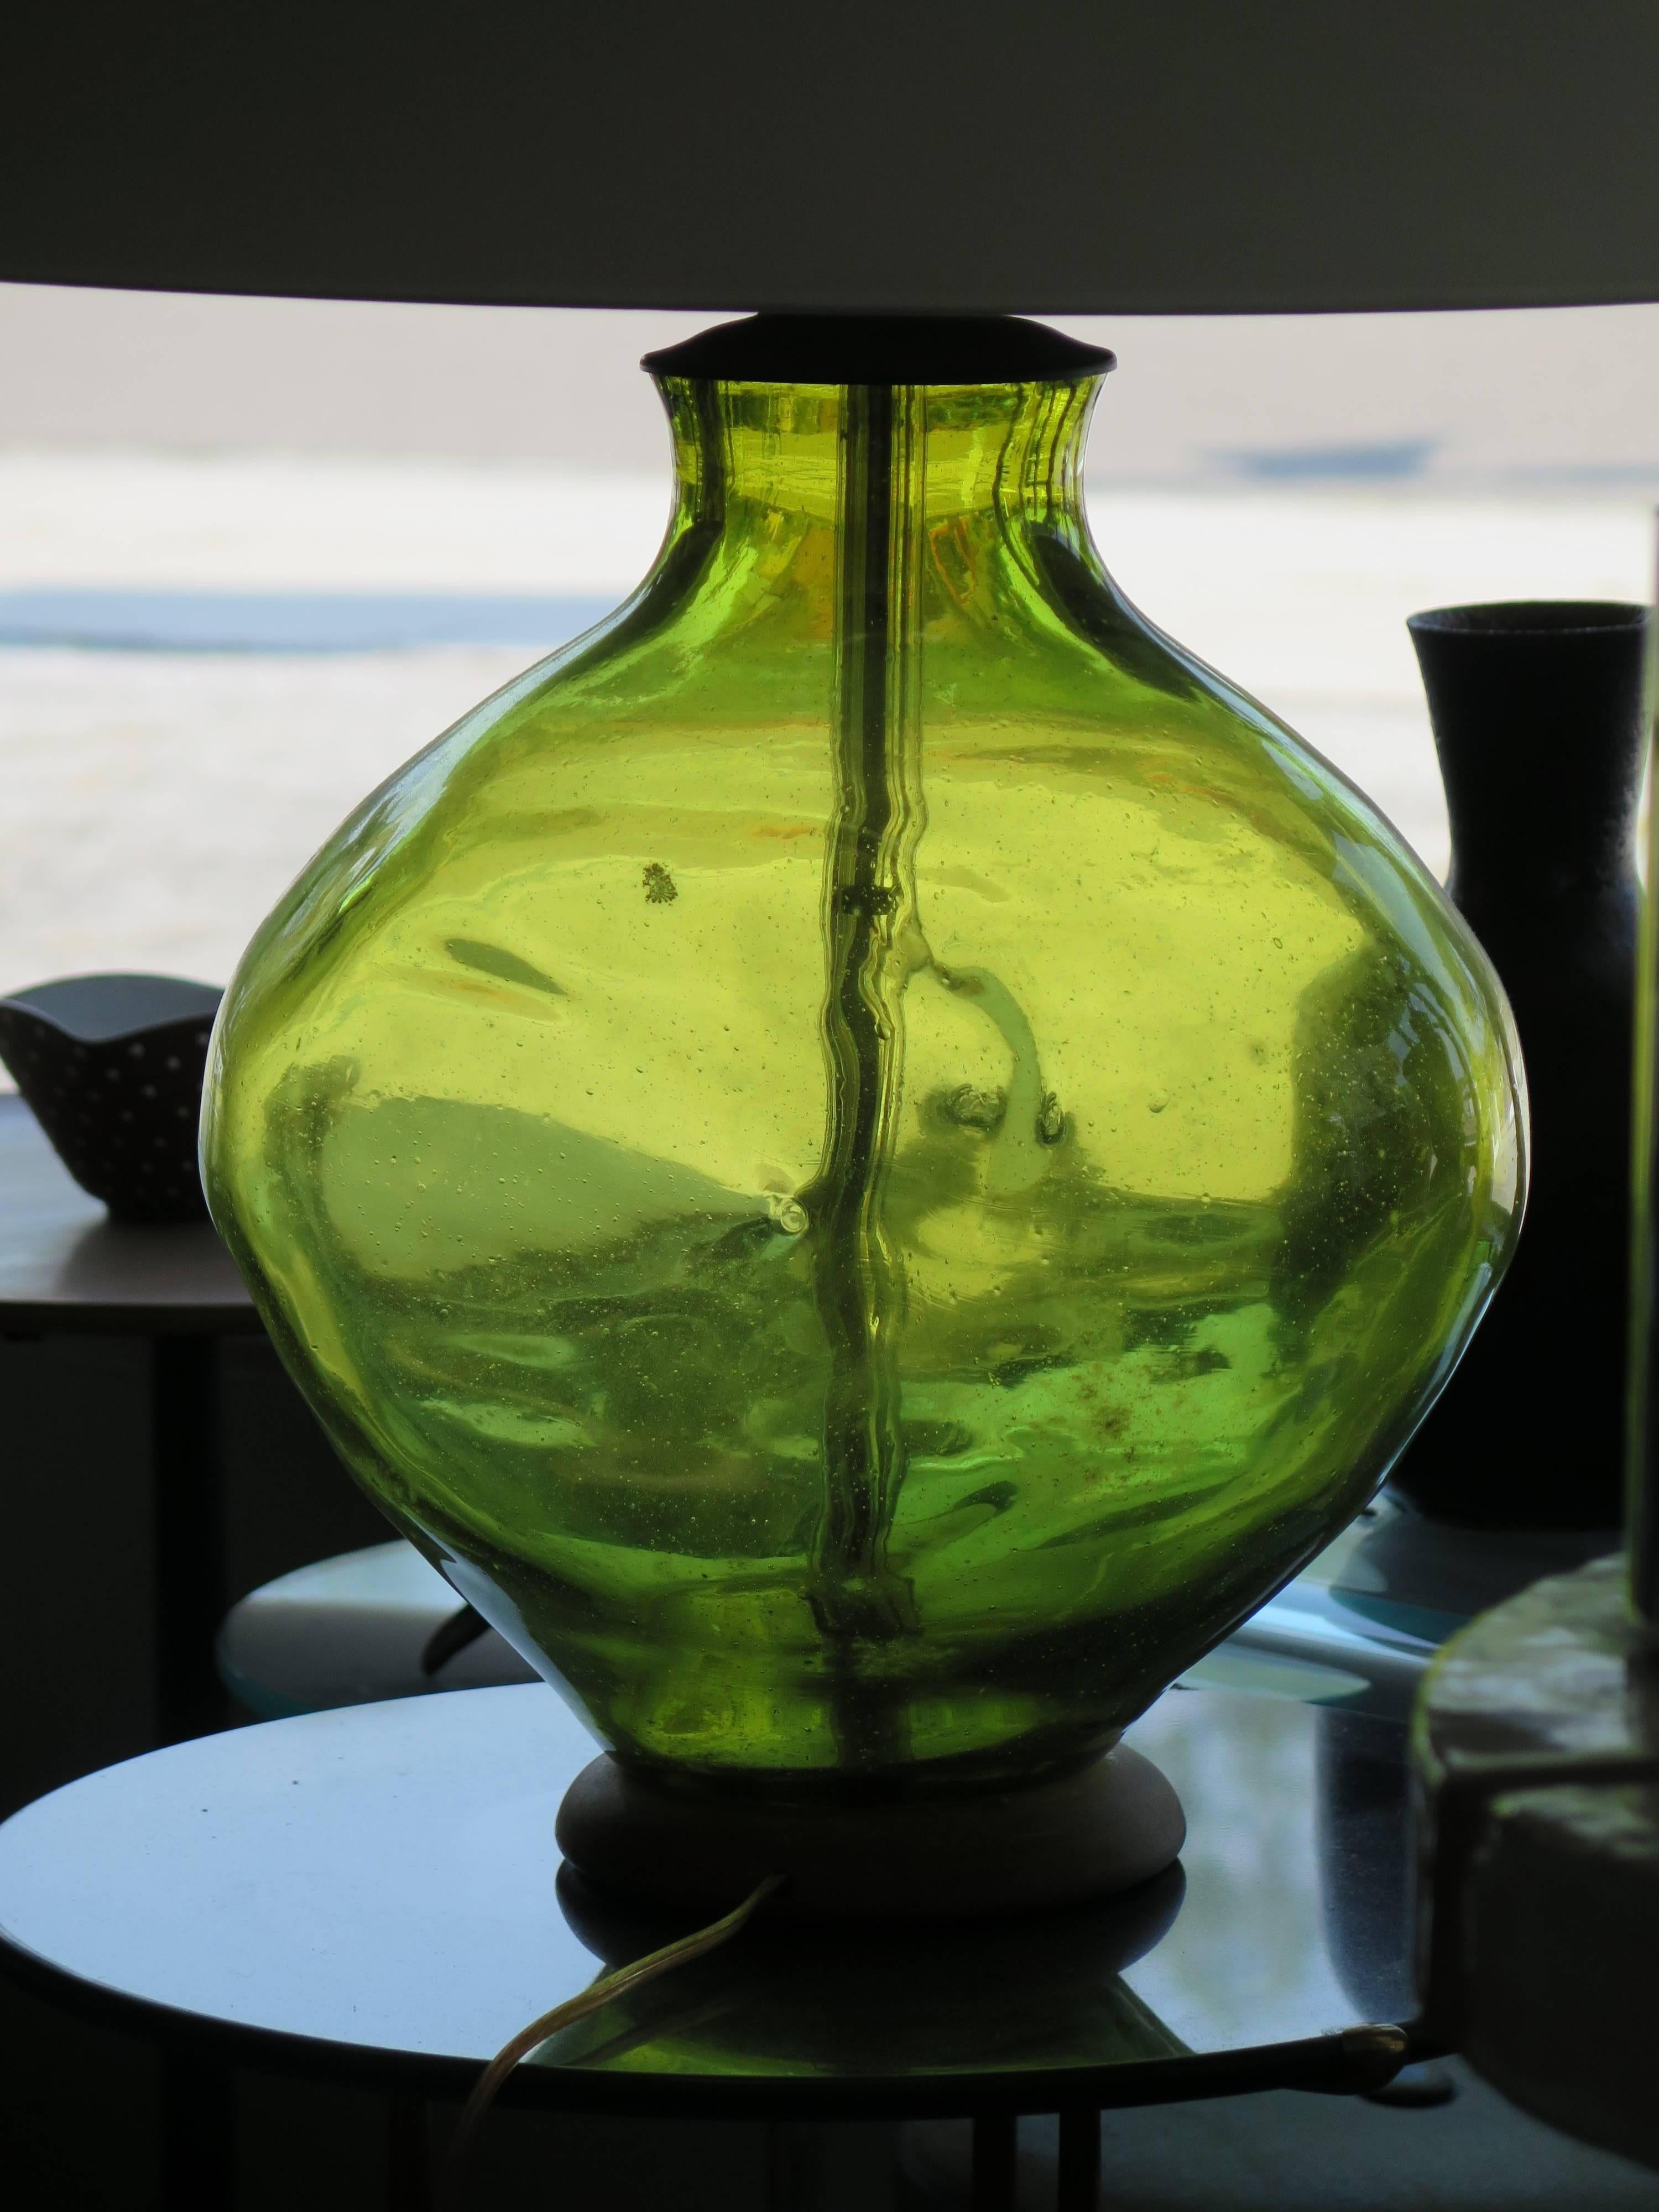 A beautiful table glass lamp, designed by Wayne Husted for Blenko. Olive green glass with bubbles, pinched on both sides. Original finial and base.